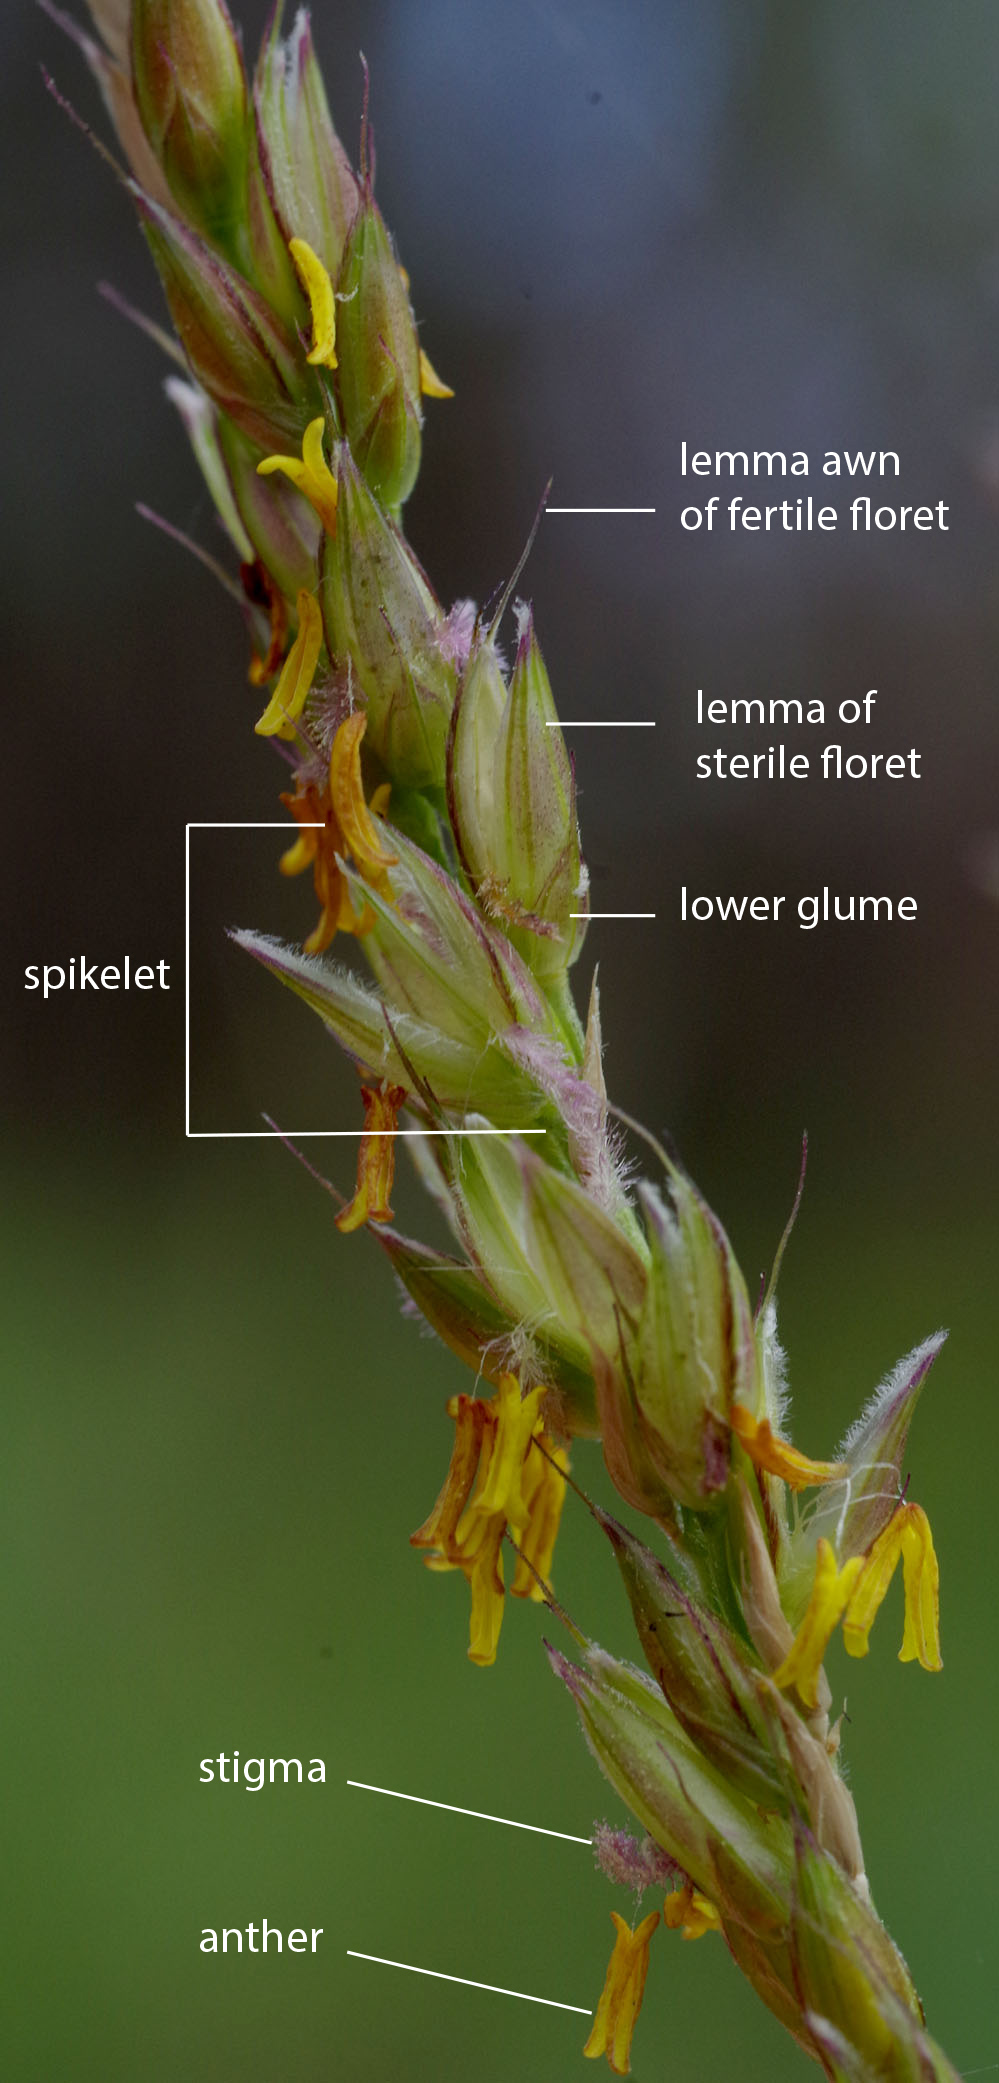 Fig. 4. Image of section of inflorescence of Alloteropsis semialata showing details of spikelets. (CC By: RJCumming d70799a)